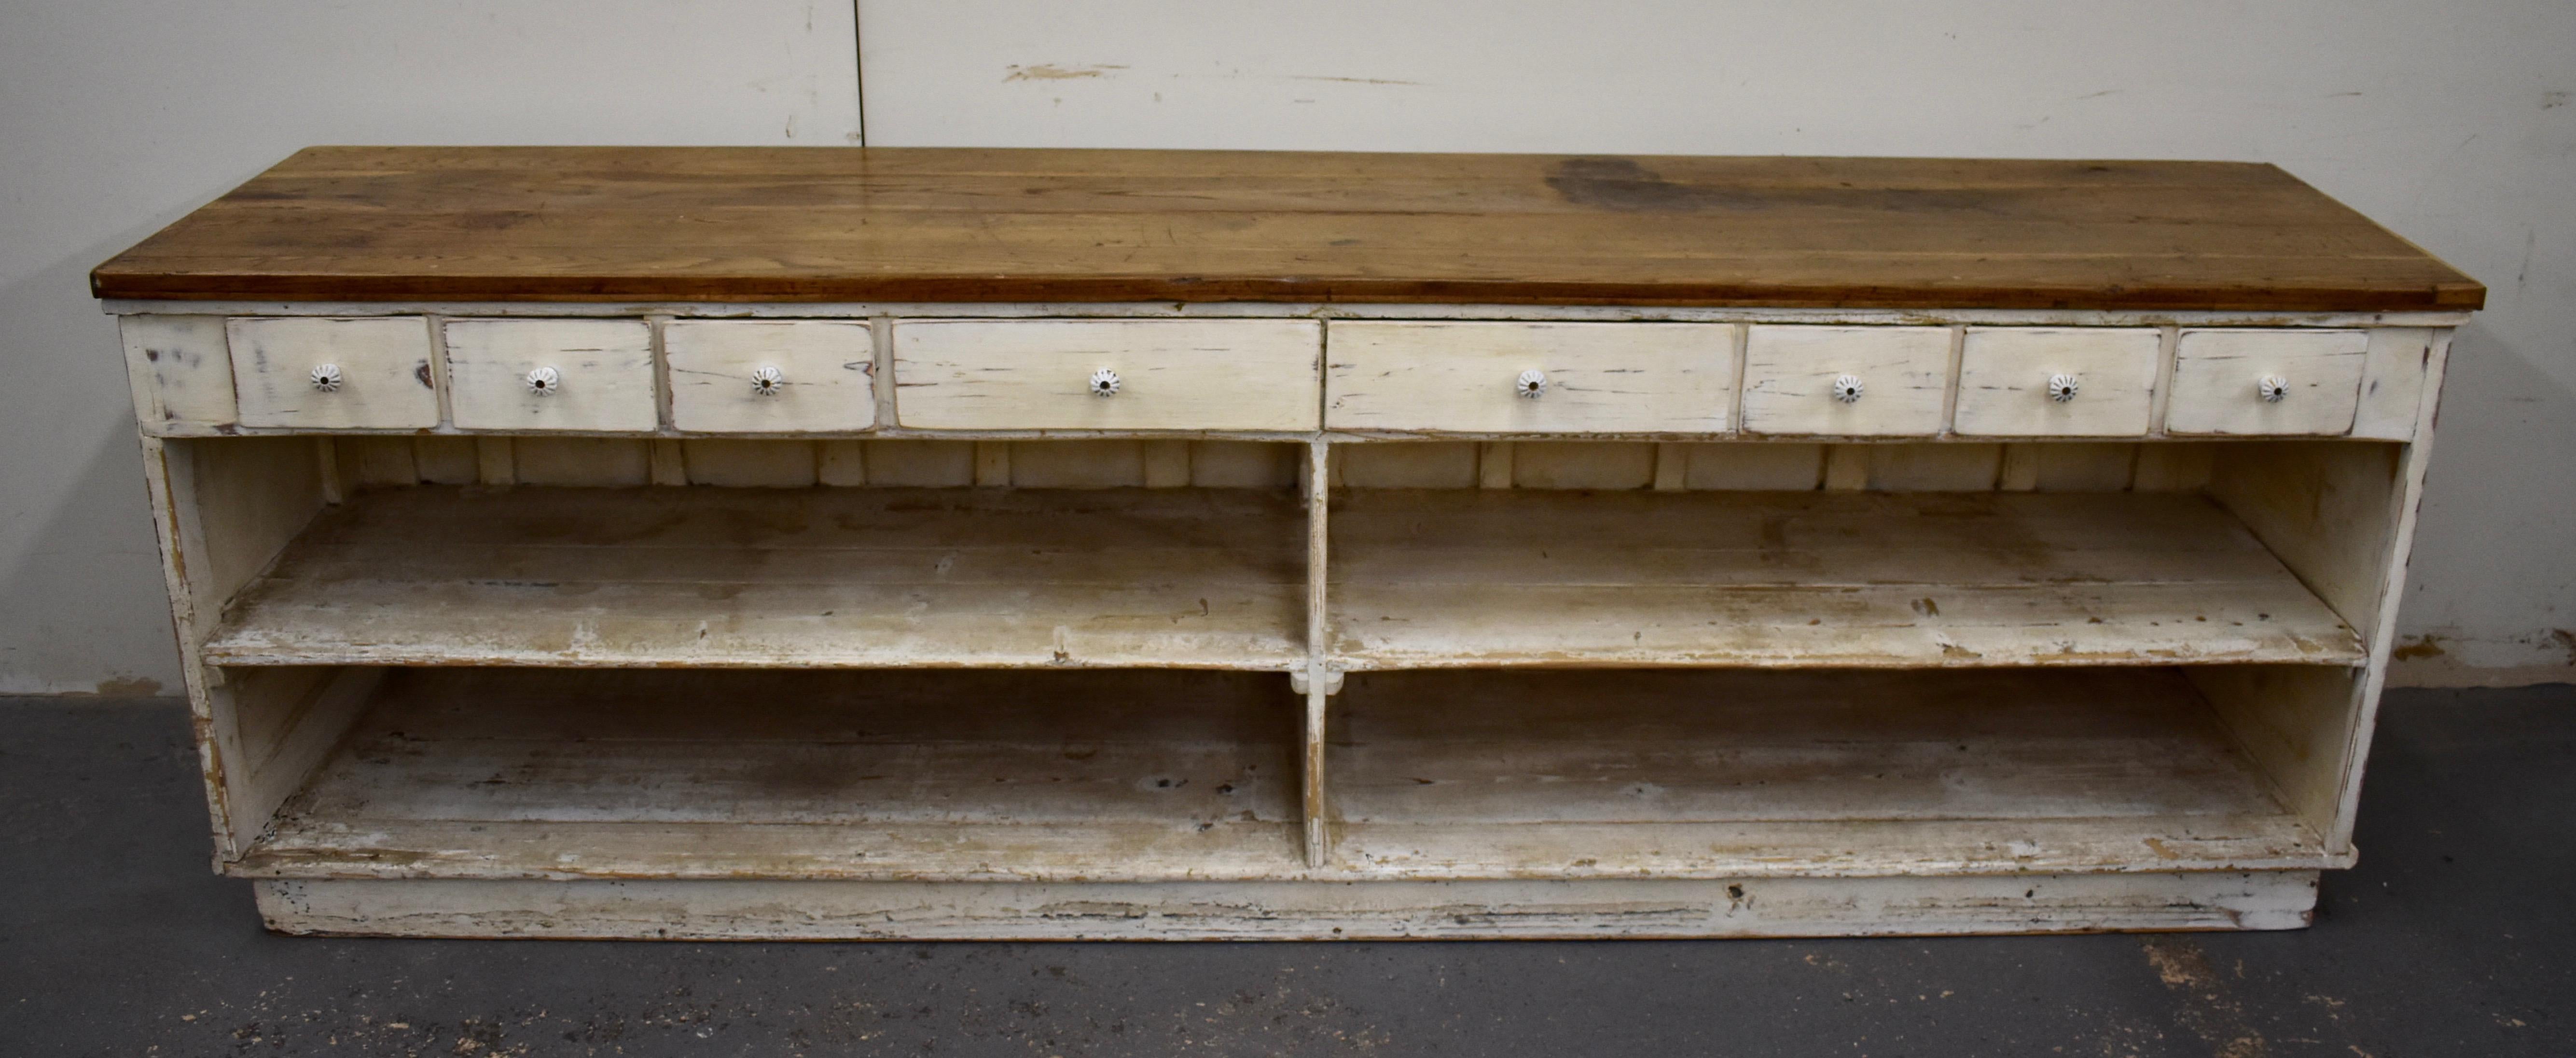 This is a huge vintage store counter with a pine base, one side of which is entirely plain except for four applied corbels. The other, the storekeeper’s side, is open with eight drawers with ceramic knobs along the top apron and a deep storage